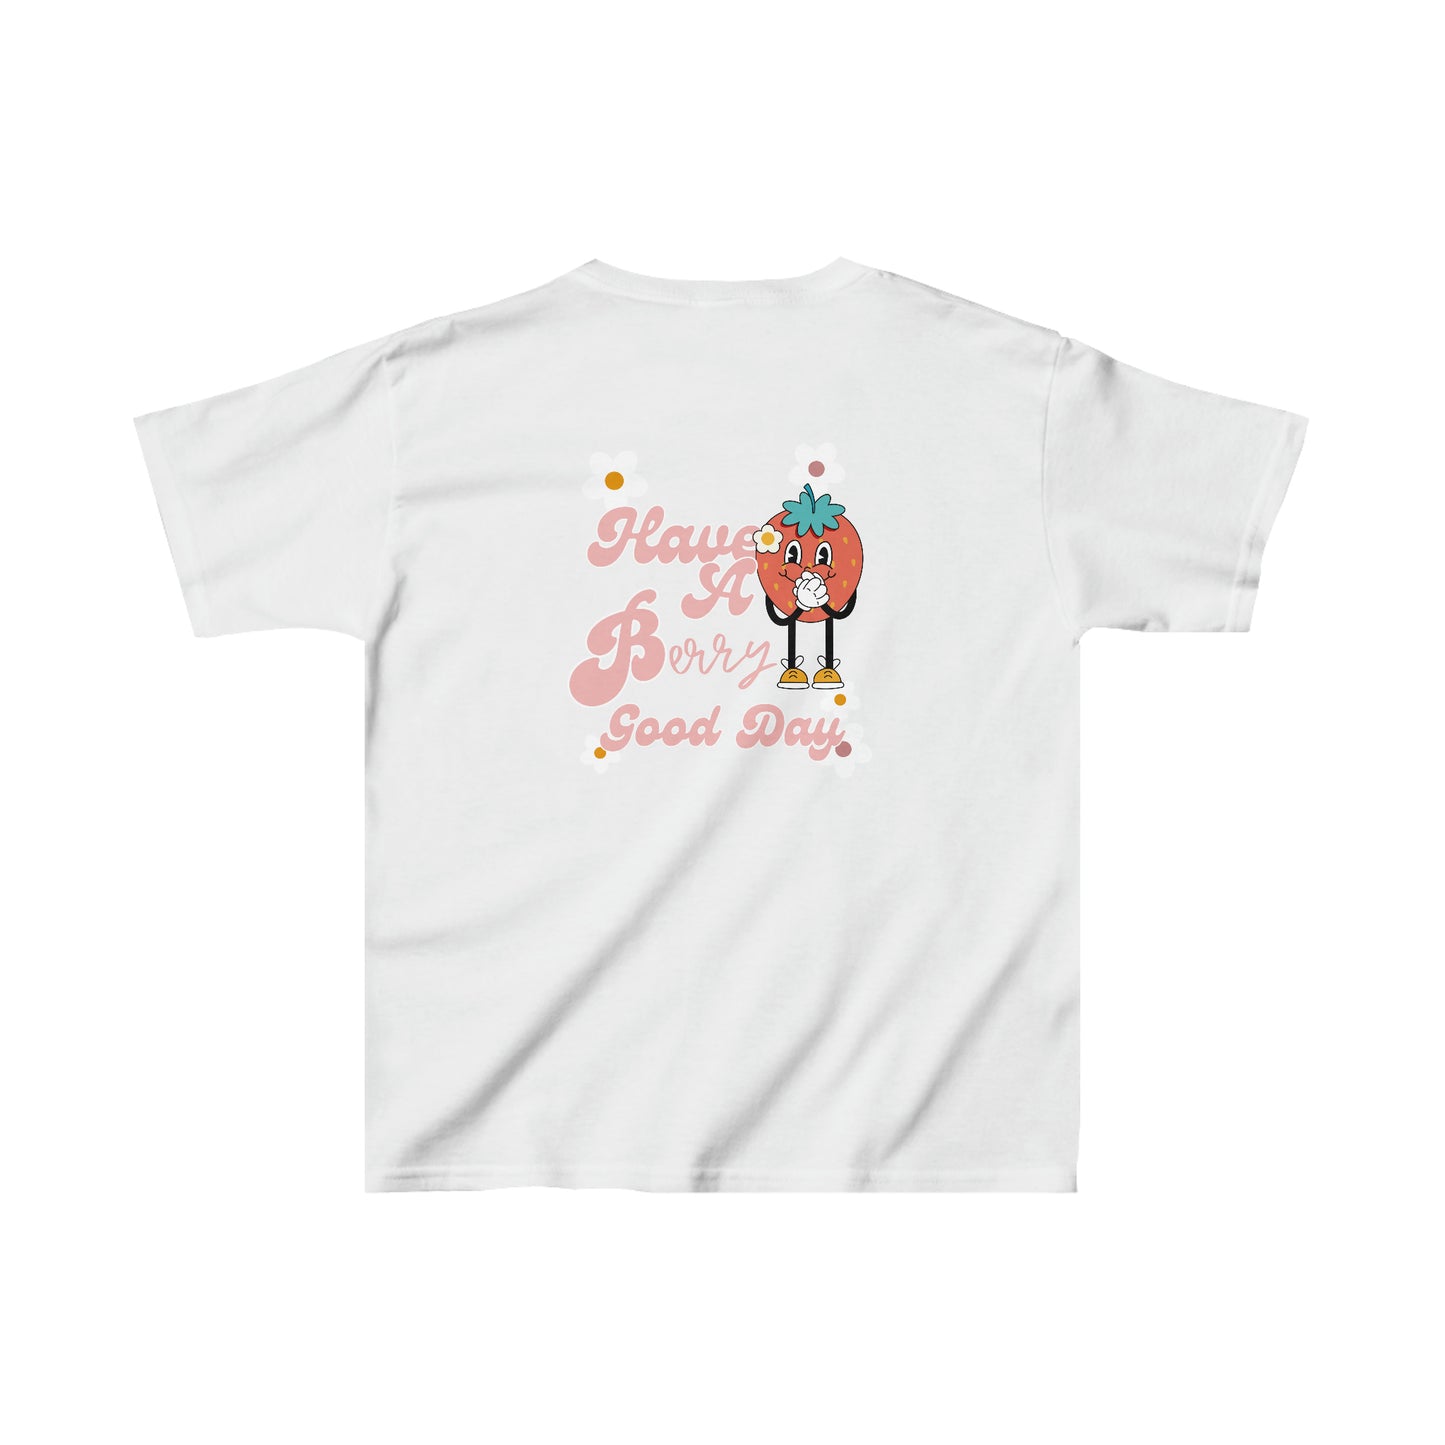 Vintage BERRY GOOD DAY t-shirt - child